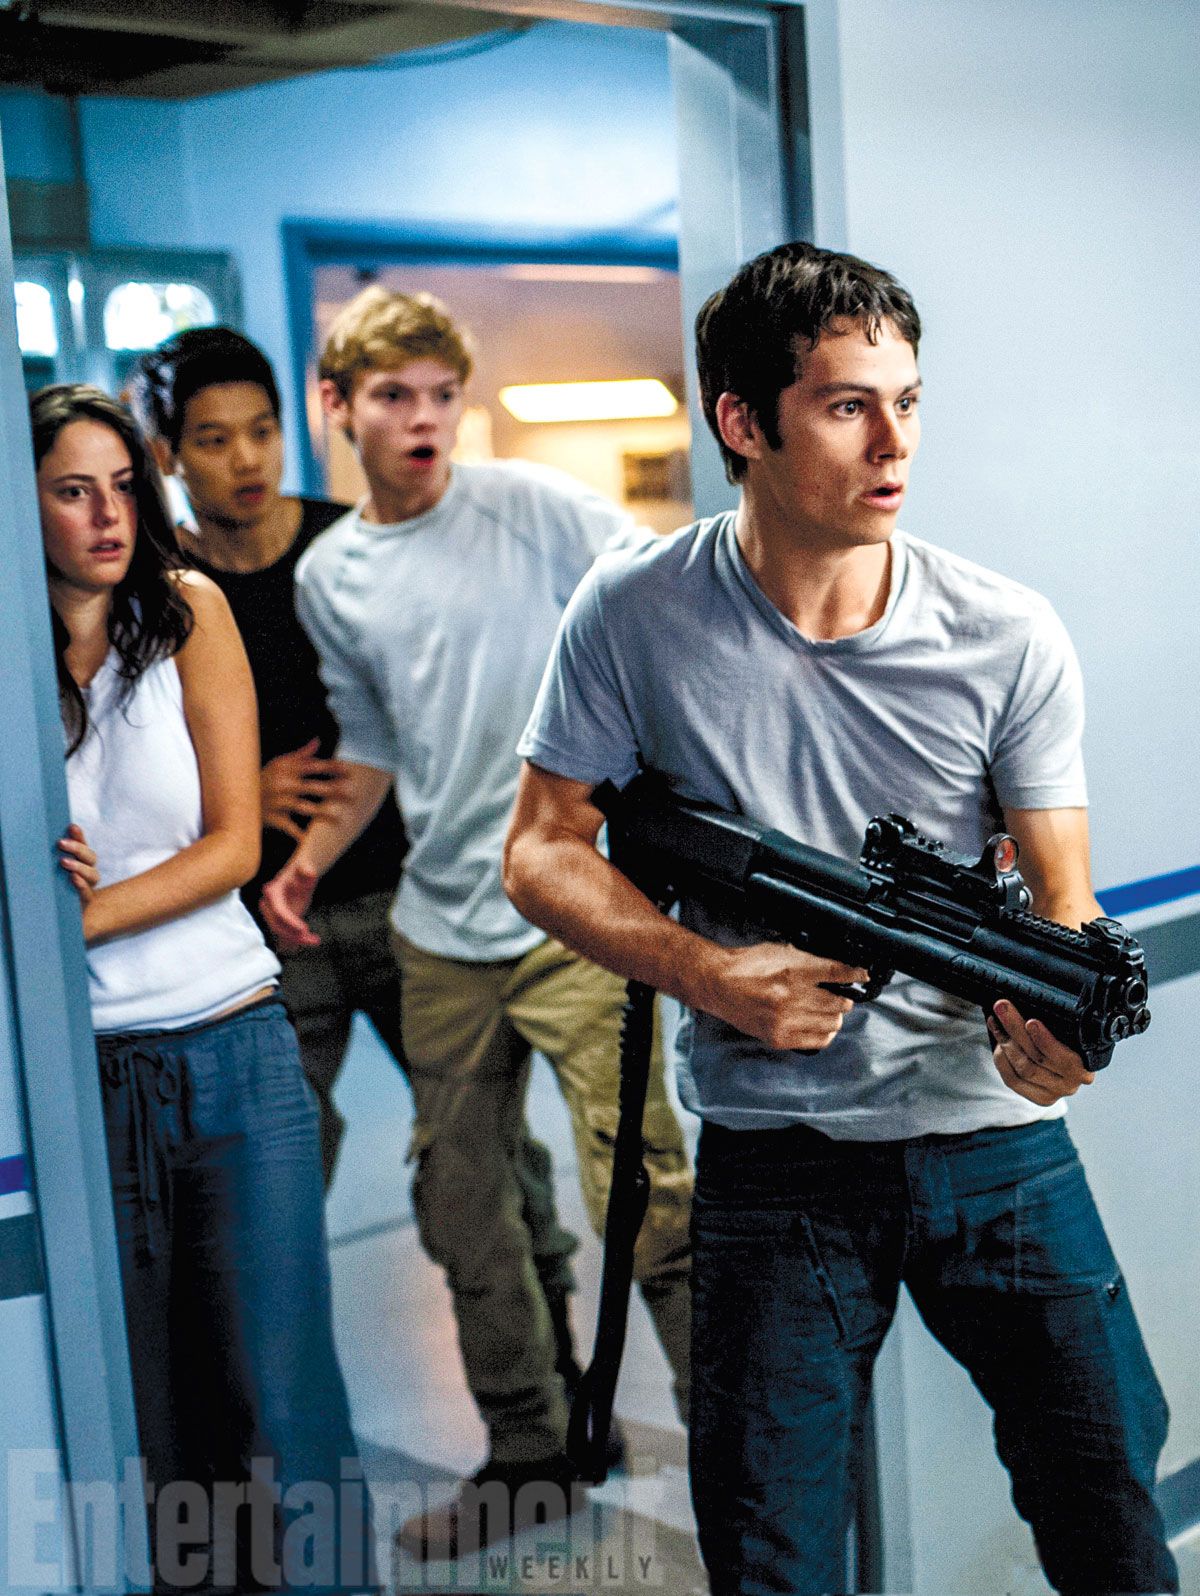 Maze Runner 2: The Scorch Trials' premieres today at MC and Empire!